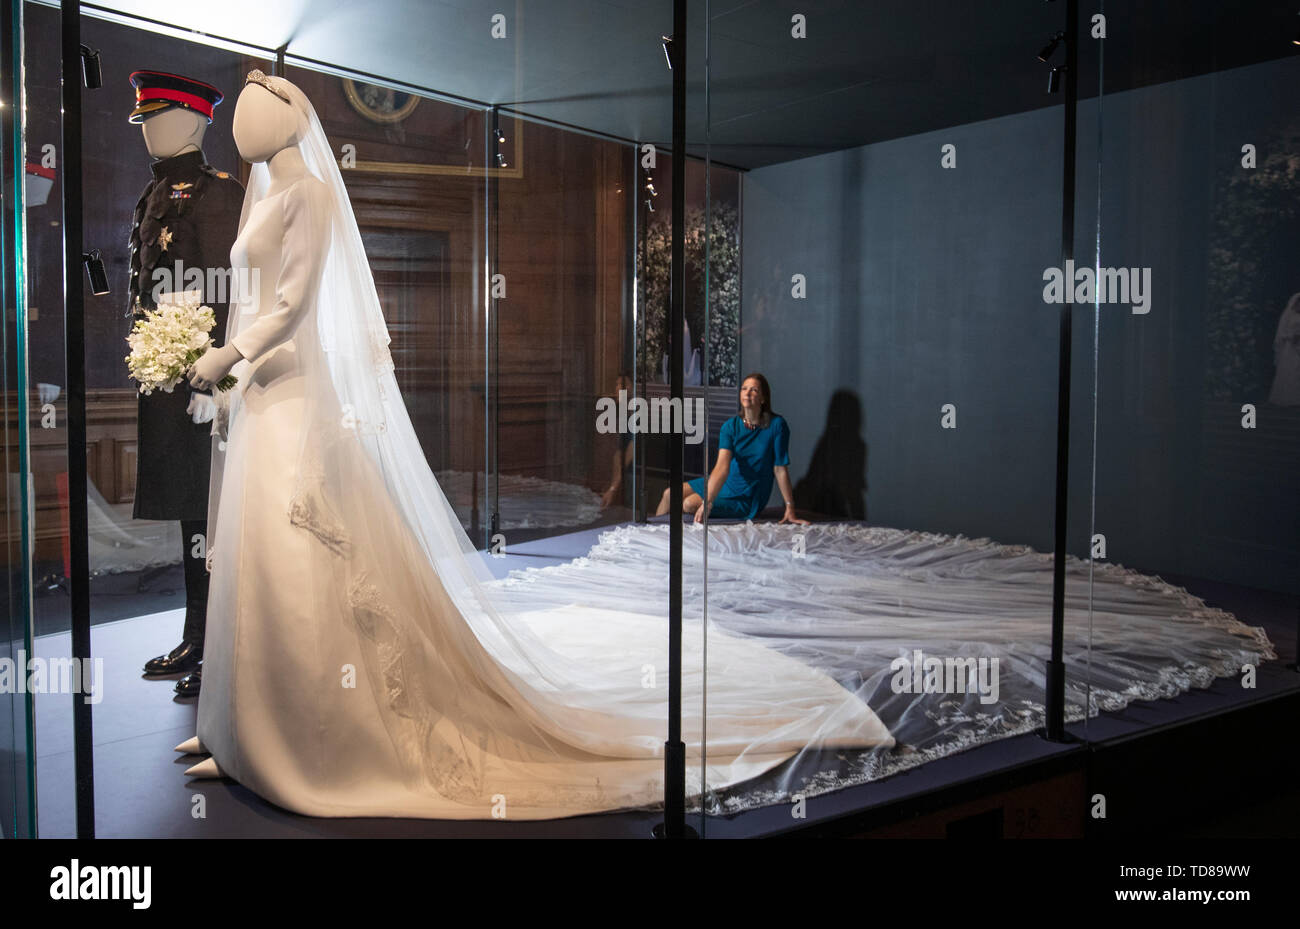 Curator Caroline de Gauitaut puts the finishing touches to a special exhibition 'A Royal Wedding: The Duke and Duchess of Sussex' featuring a display of their Royal Highnesses' wedding outfits at the Palace of Holyroodhouse, Edinburgh. The exhibition will open to the public on Friday June 14, 2019. Stock Photo